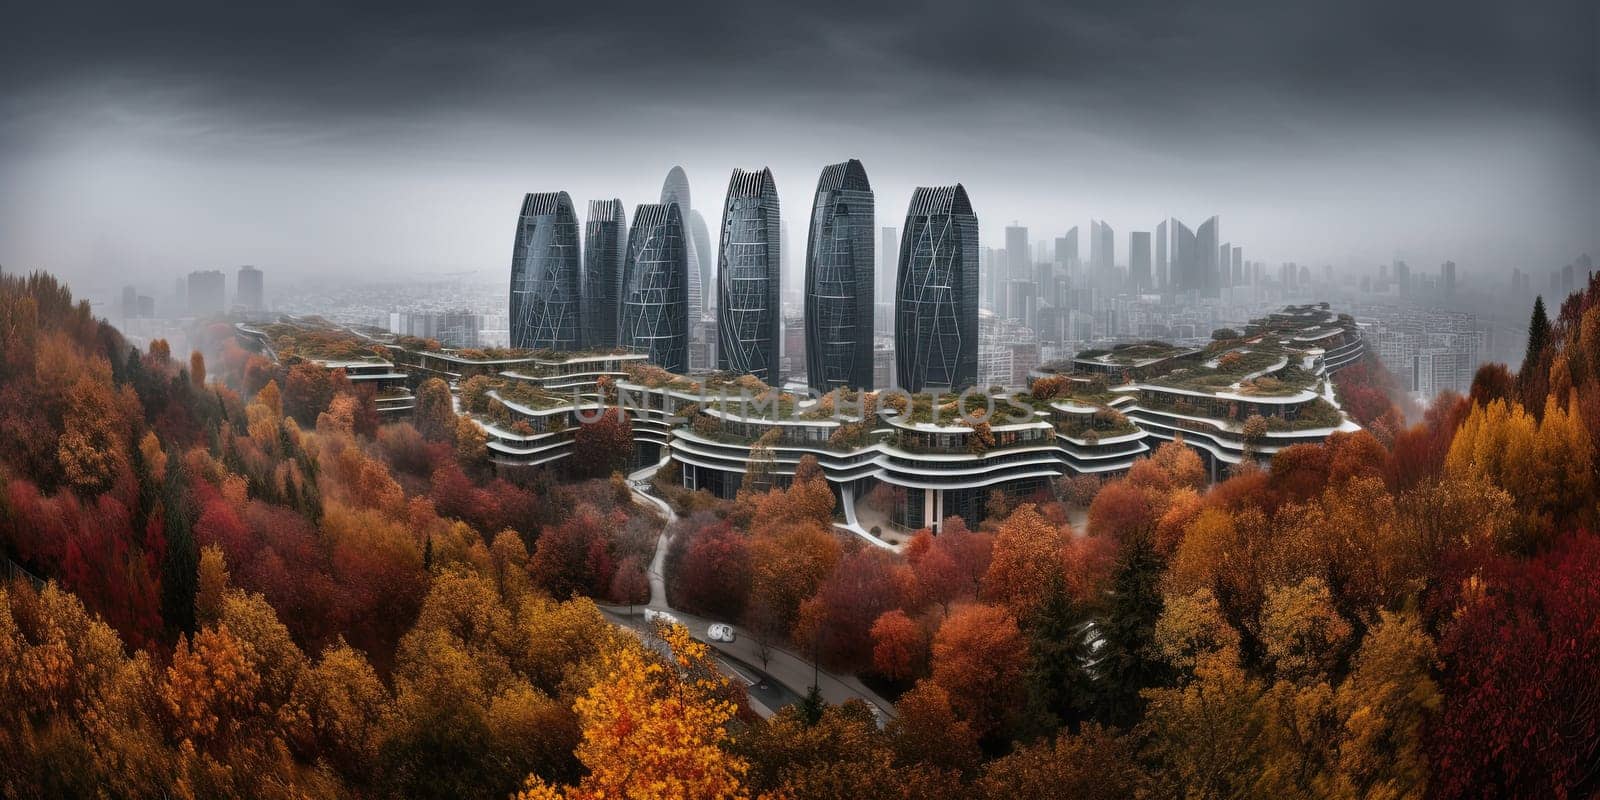 Amazing Fantastic Landscape And City With High Skyscrapers At Far , Concept Of Future Cities